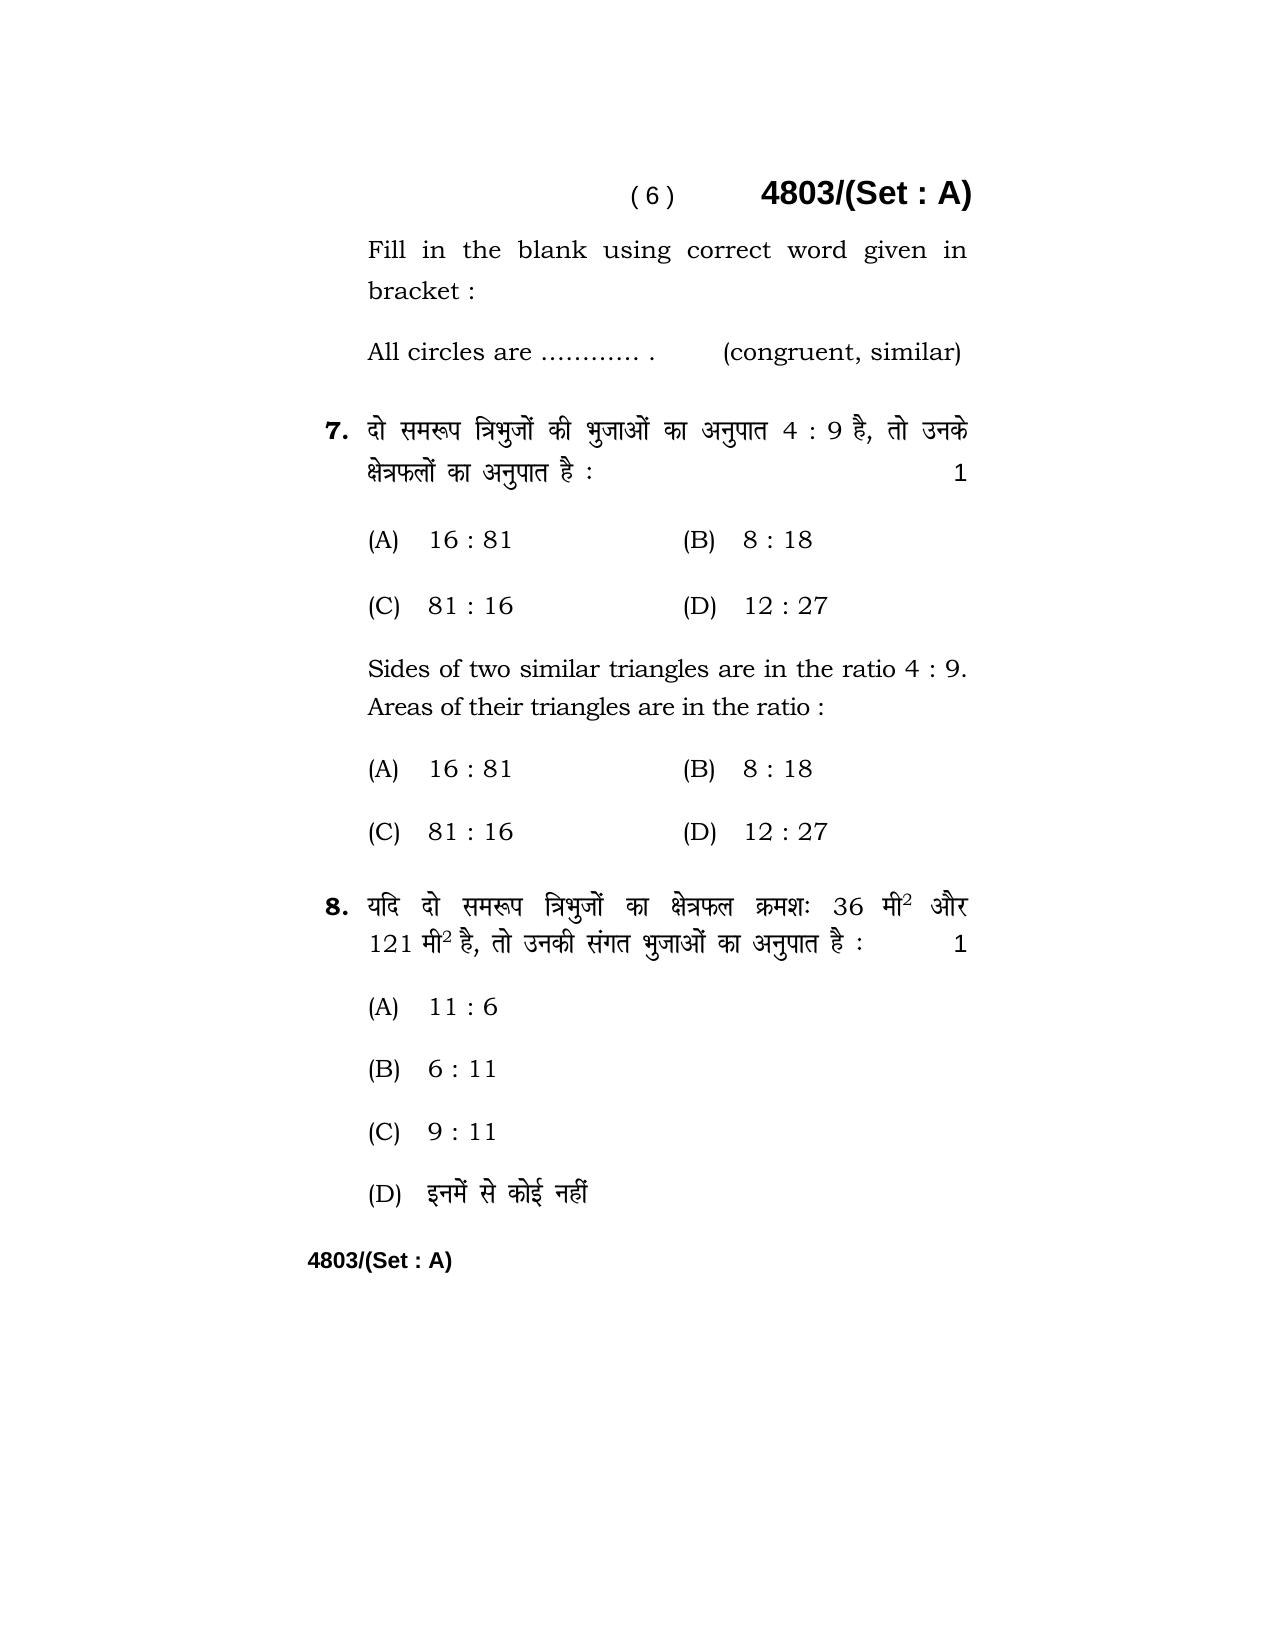 Haryana Board HBSE Class 10 Mathematics 2020 Question Paper - Page 6